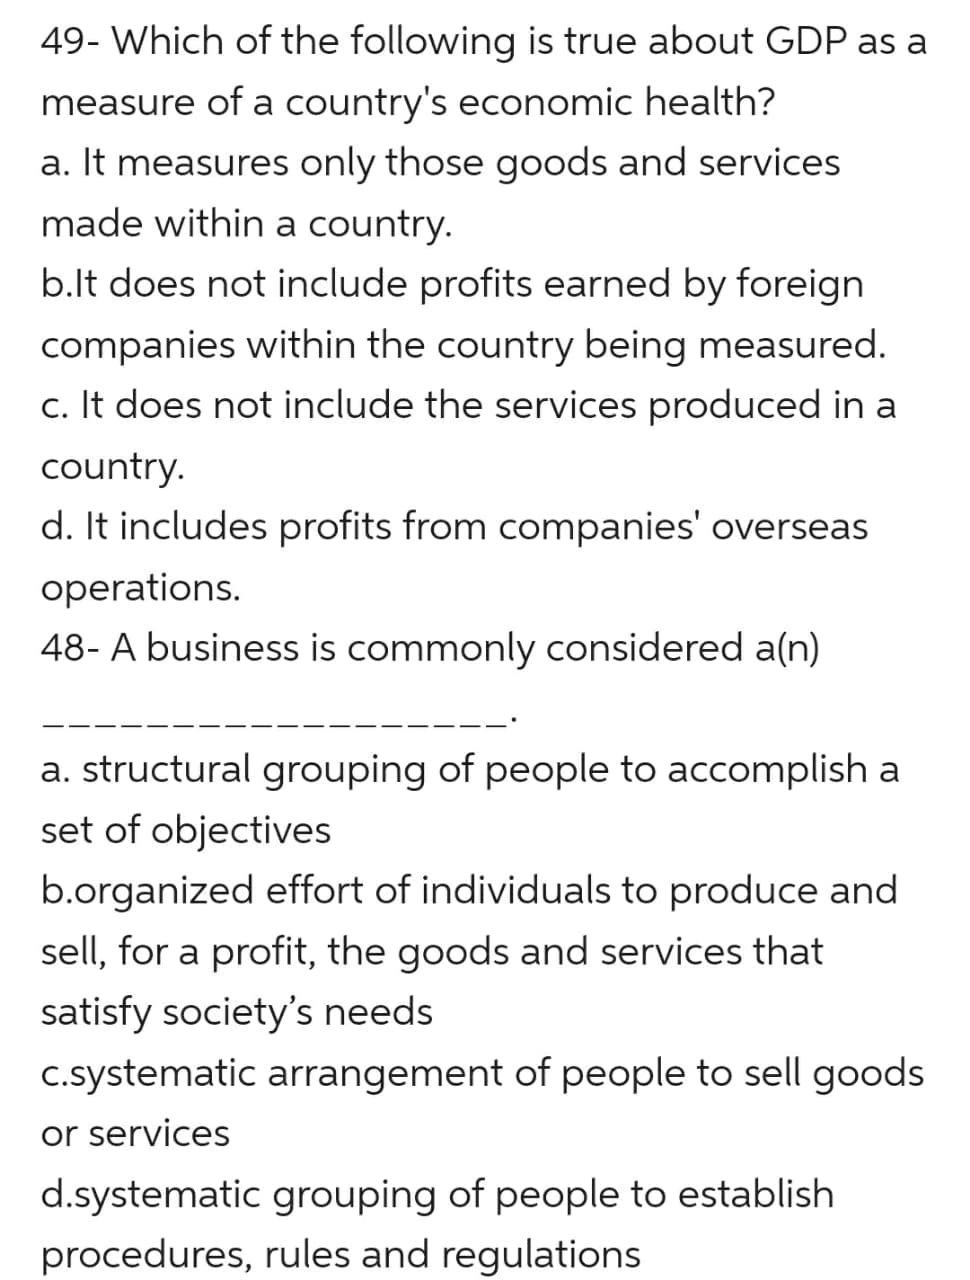 49- Which of the following is true about GDP as a
measure of a country's economic health?
a. It measures only those goods and services
made within a country.
b.lt does not include profits earned by foreign
companies within the country being measured.
c. It does not include the services produced in a
country.
d. It includes profits from companies' overseas
operations.
48- A business is commonly considered a(n)
a. structural grouping of people to accomplish a
set of objectives
b.organized effort of individuals to produce and
sell, for a profit, the goods and services that
satisfy society's needs
c.systematic arrangement of people to sell goods
or services
d.systematic grouping of people to establish
procedures, rules and regulations